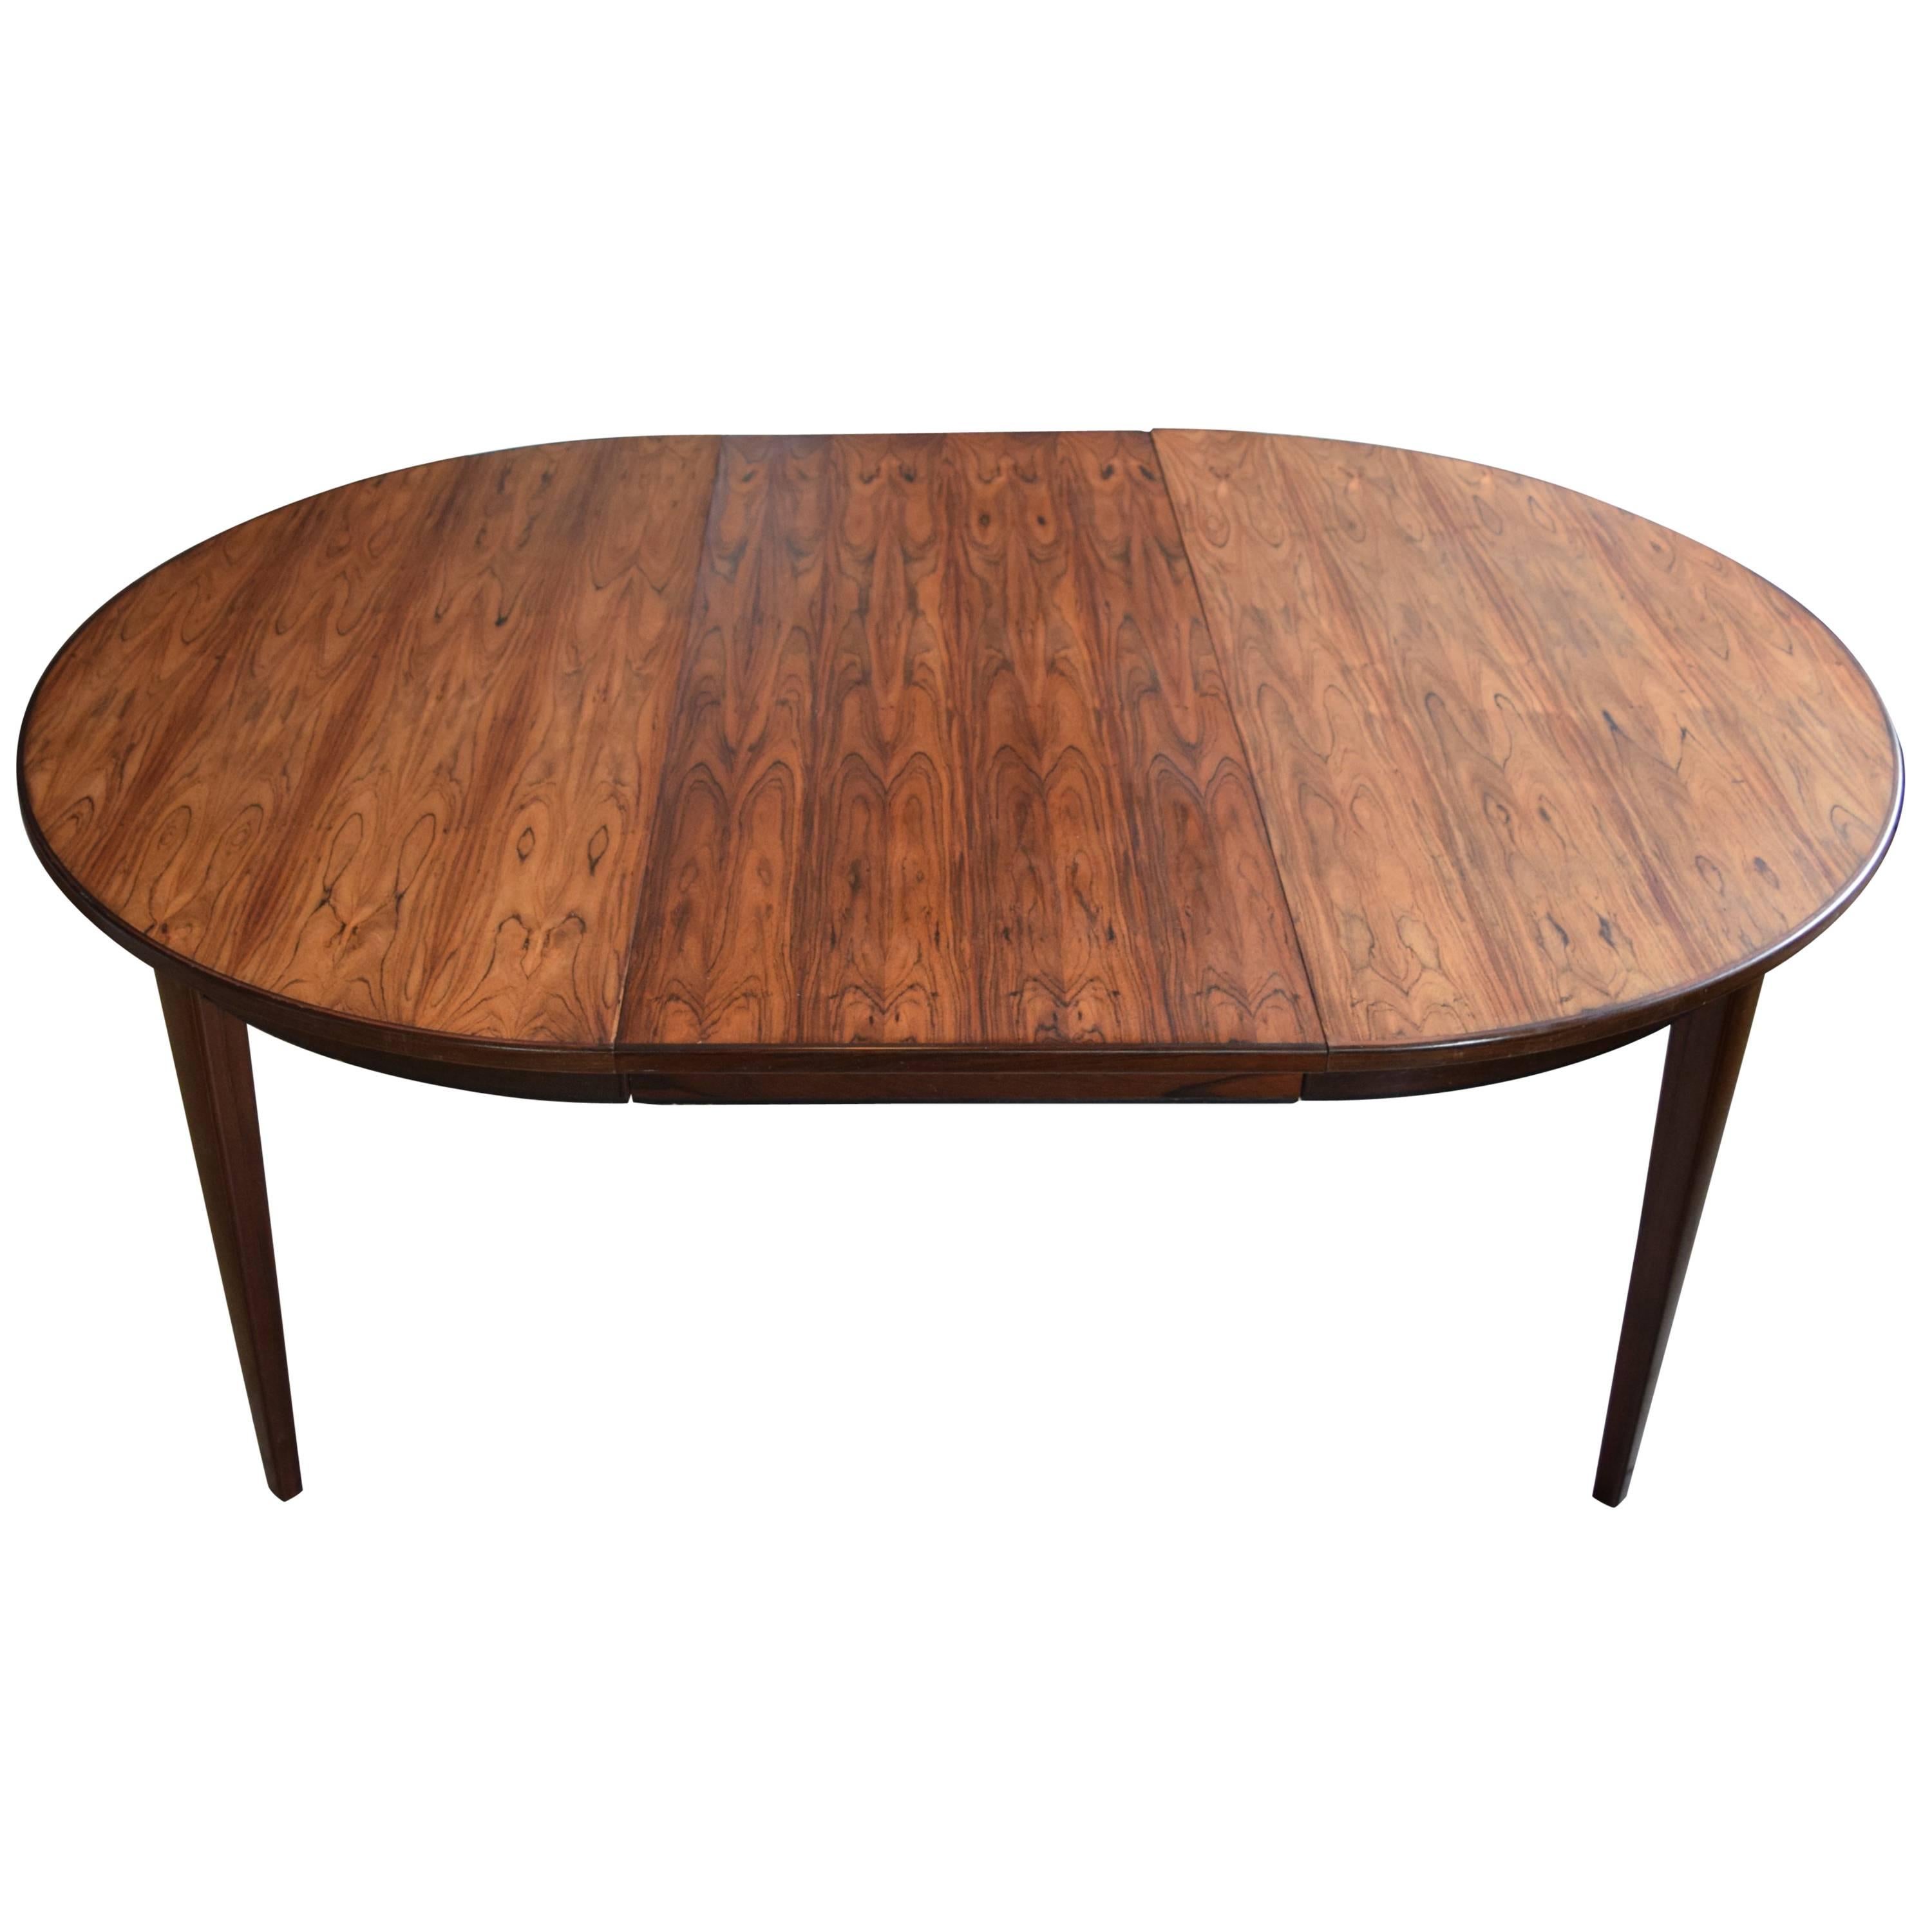 Omann Jun Model 55 Rosewood Dining Table For Sale